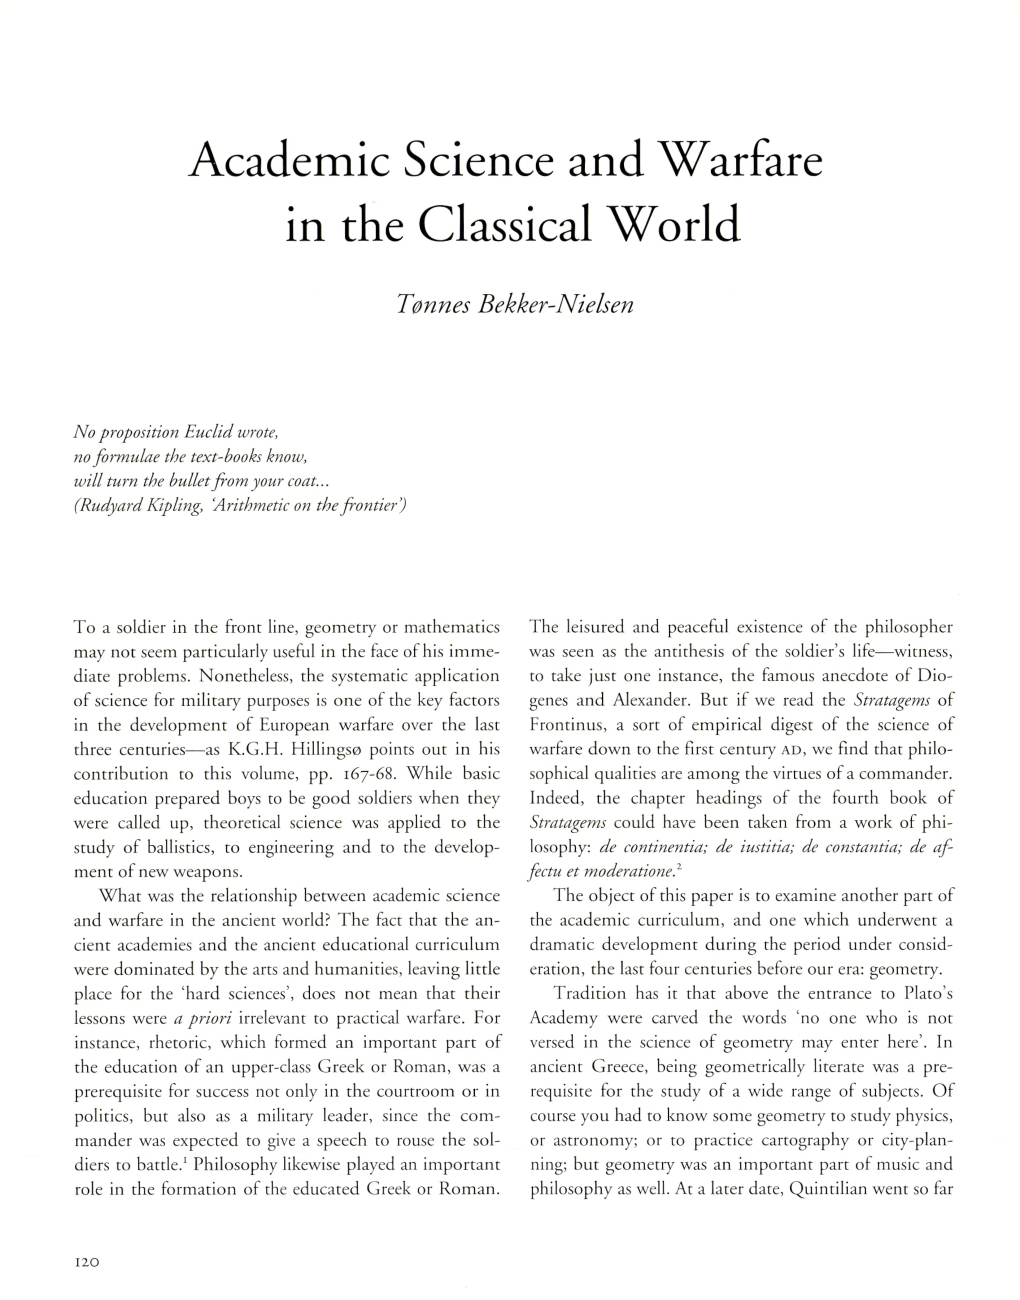 Academie Science and Warfare in the Classical World